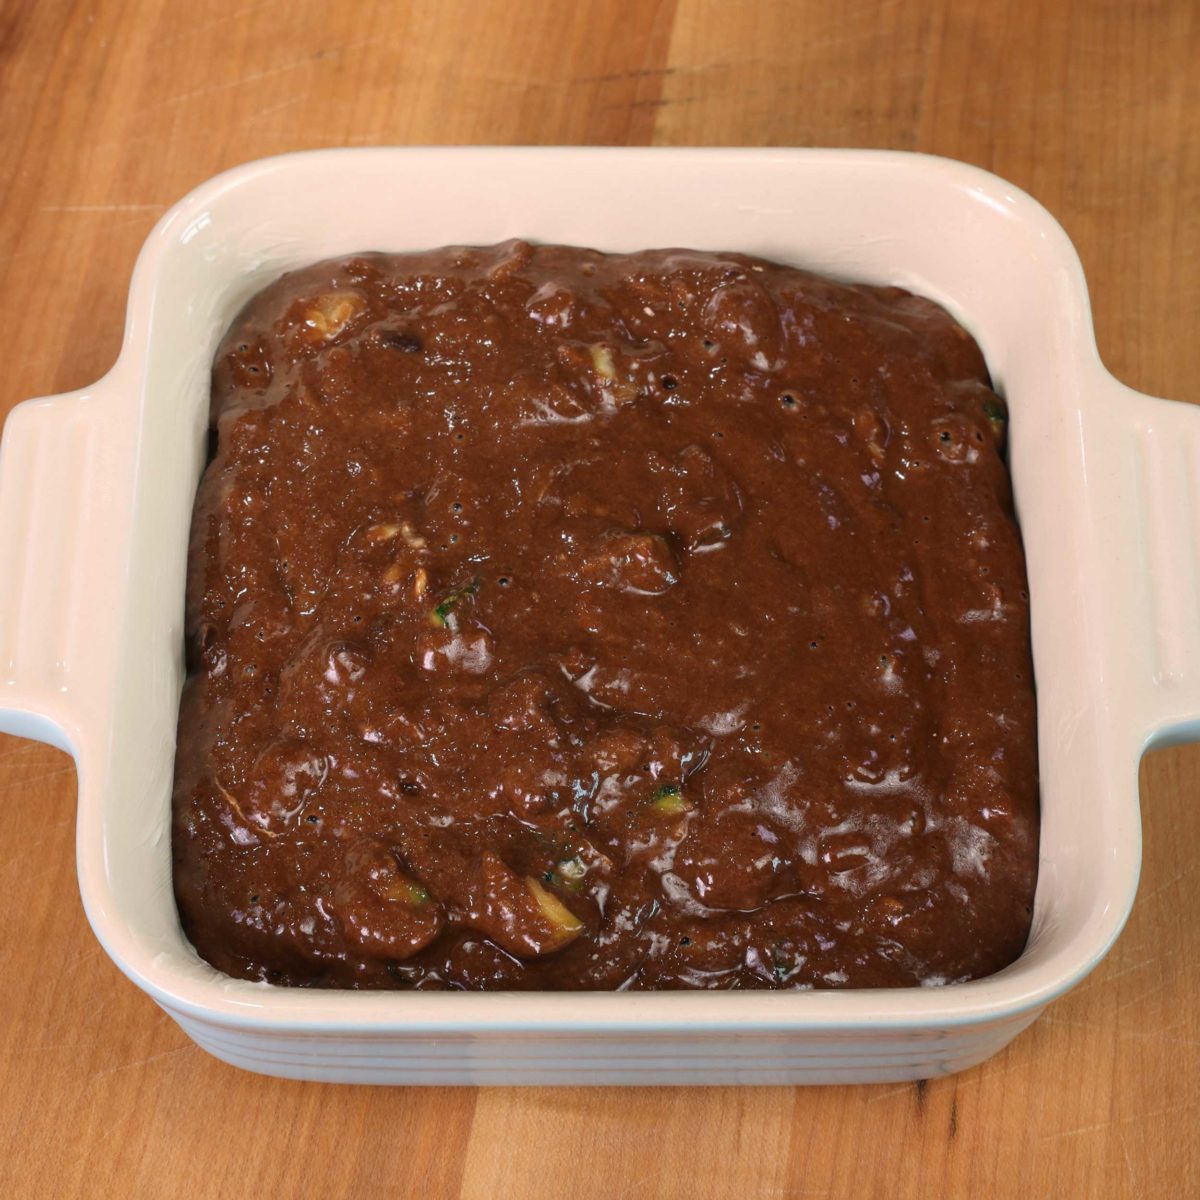 chocolate cake batter in a small blue baking dish on a brown table.